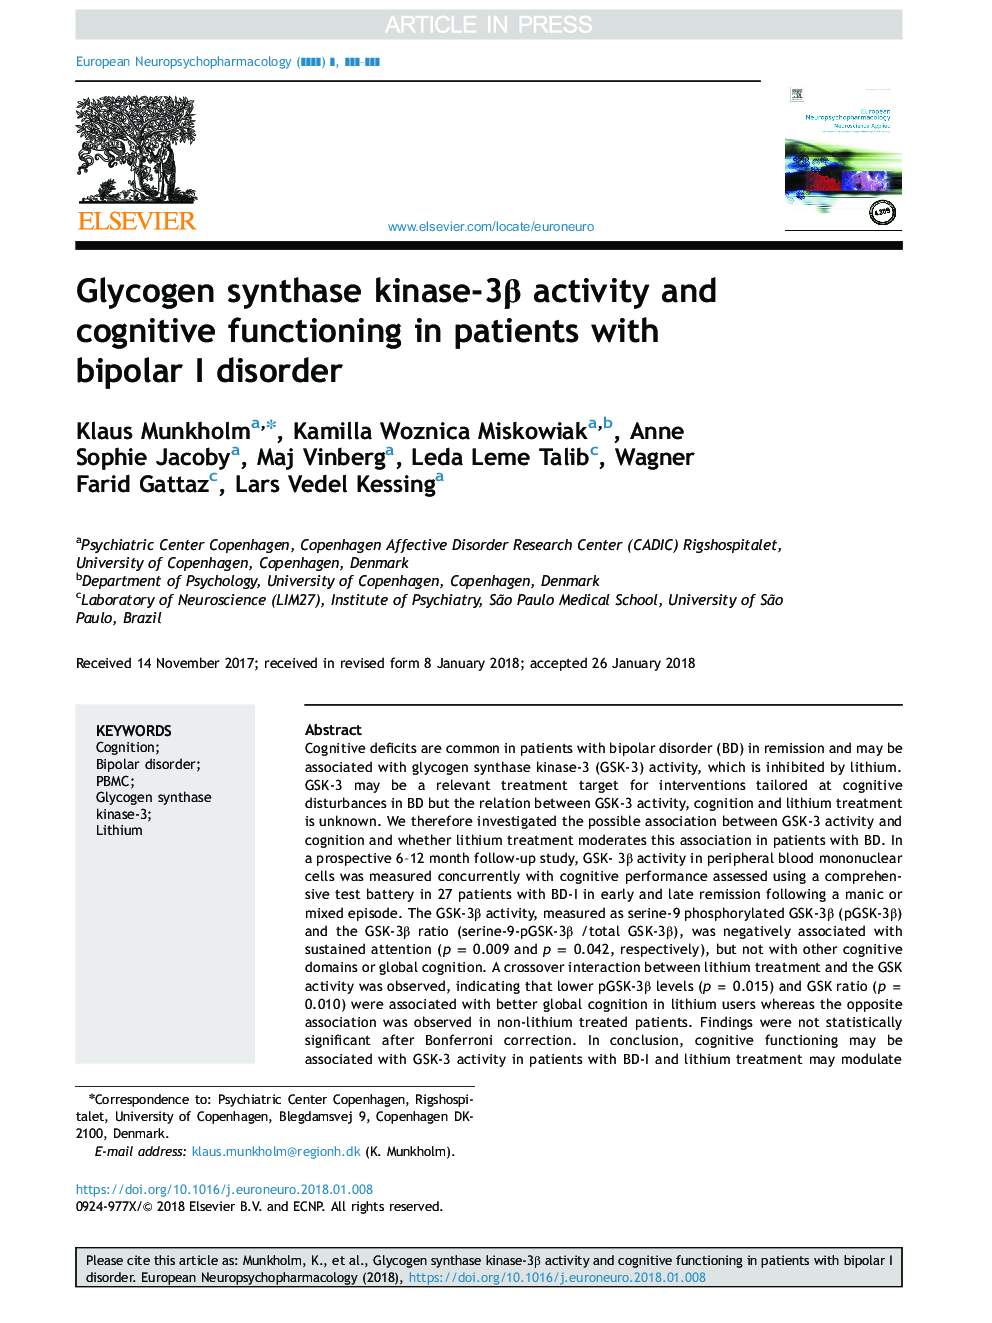 Glycogen synthase kinase-3Î² activity and cognitive functioning in patients with bipolar I disorder